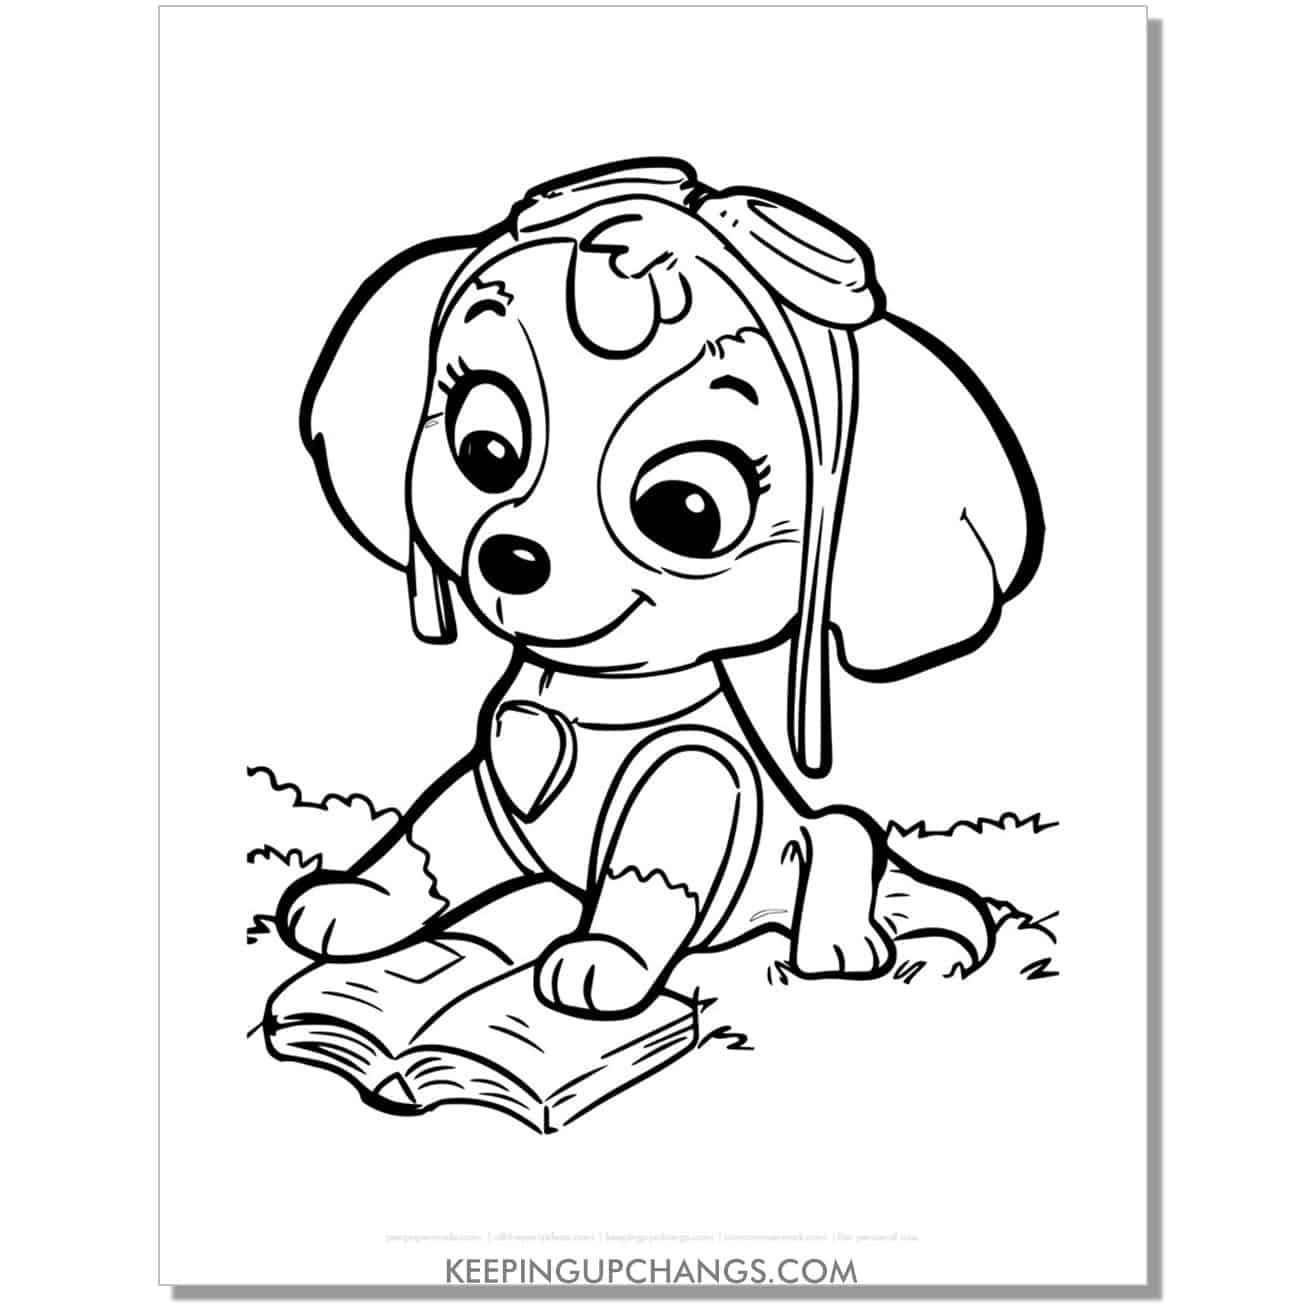 free skye reading a book paw patrol coloring page, sheet.